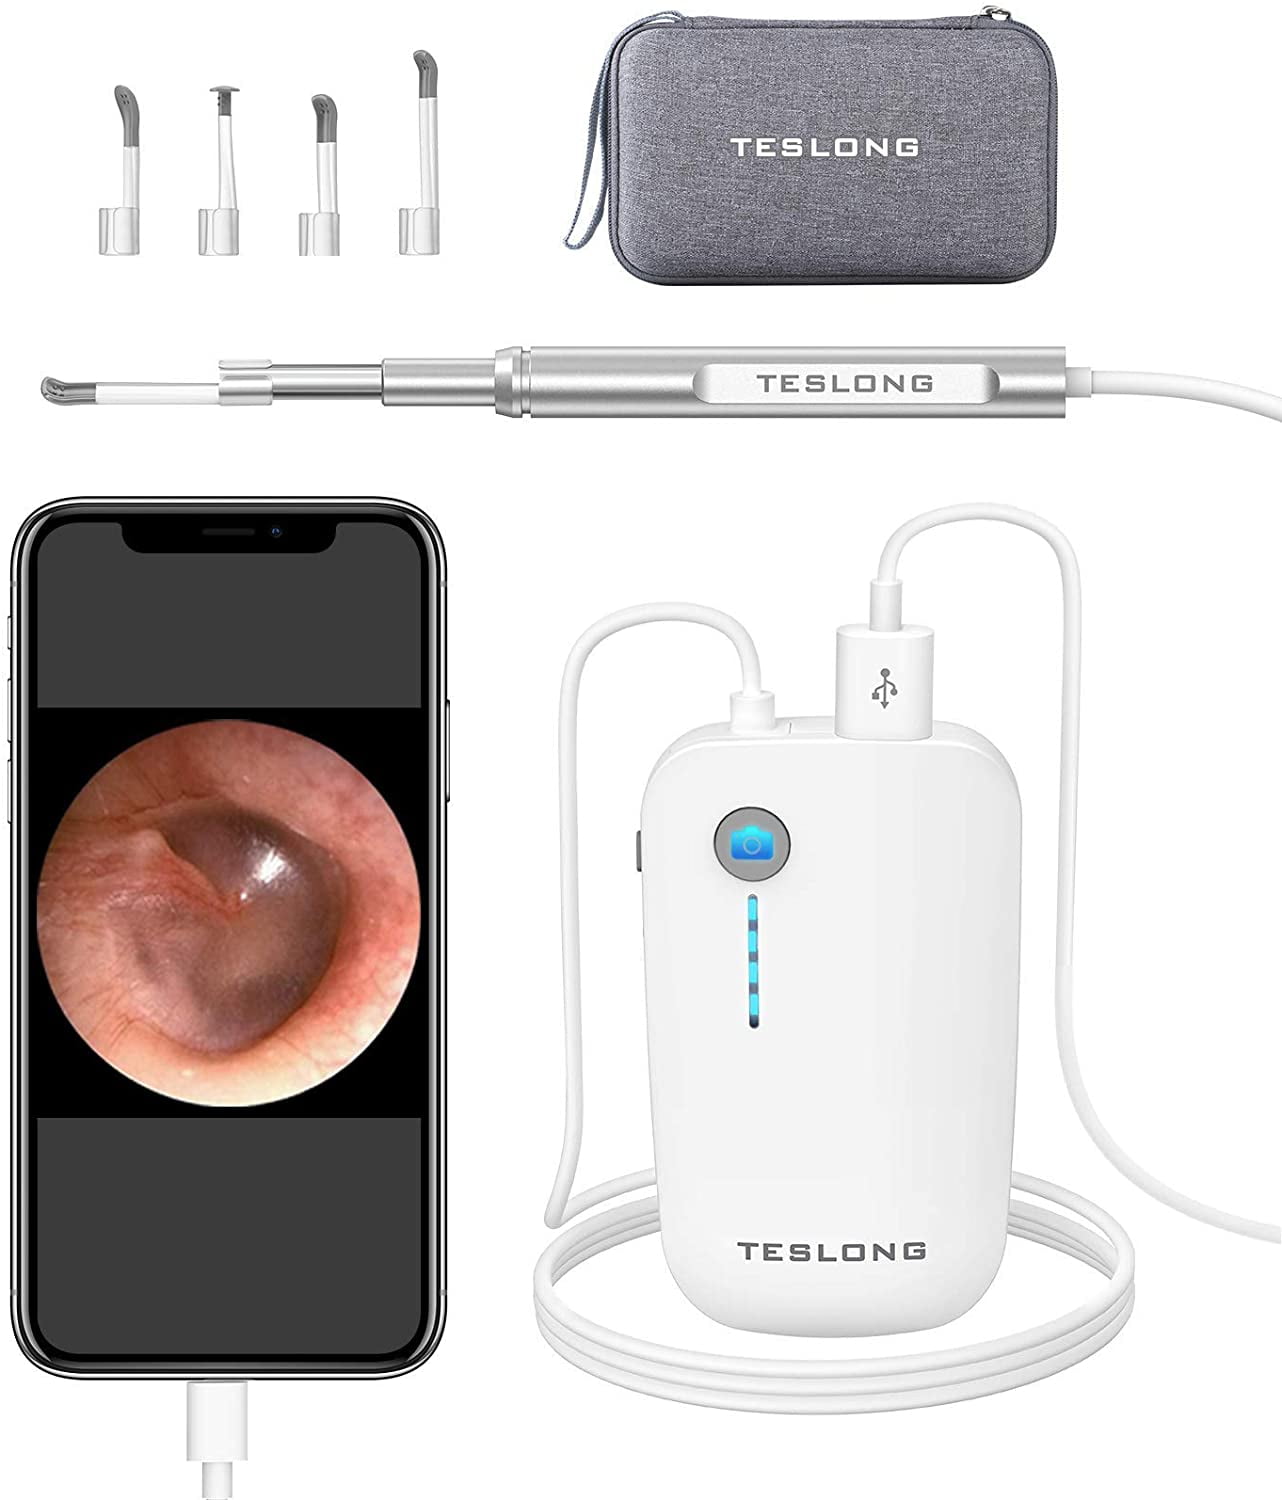 Compatible with Android iOS Smartphone and Tablet LOFTer Upgraded 3.9mm 1080P FHD Ear Camera Set Super Light Ear Wax Remover Tool with Temperature Control Chip White Wireless Digital Otoscope